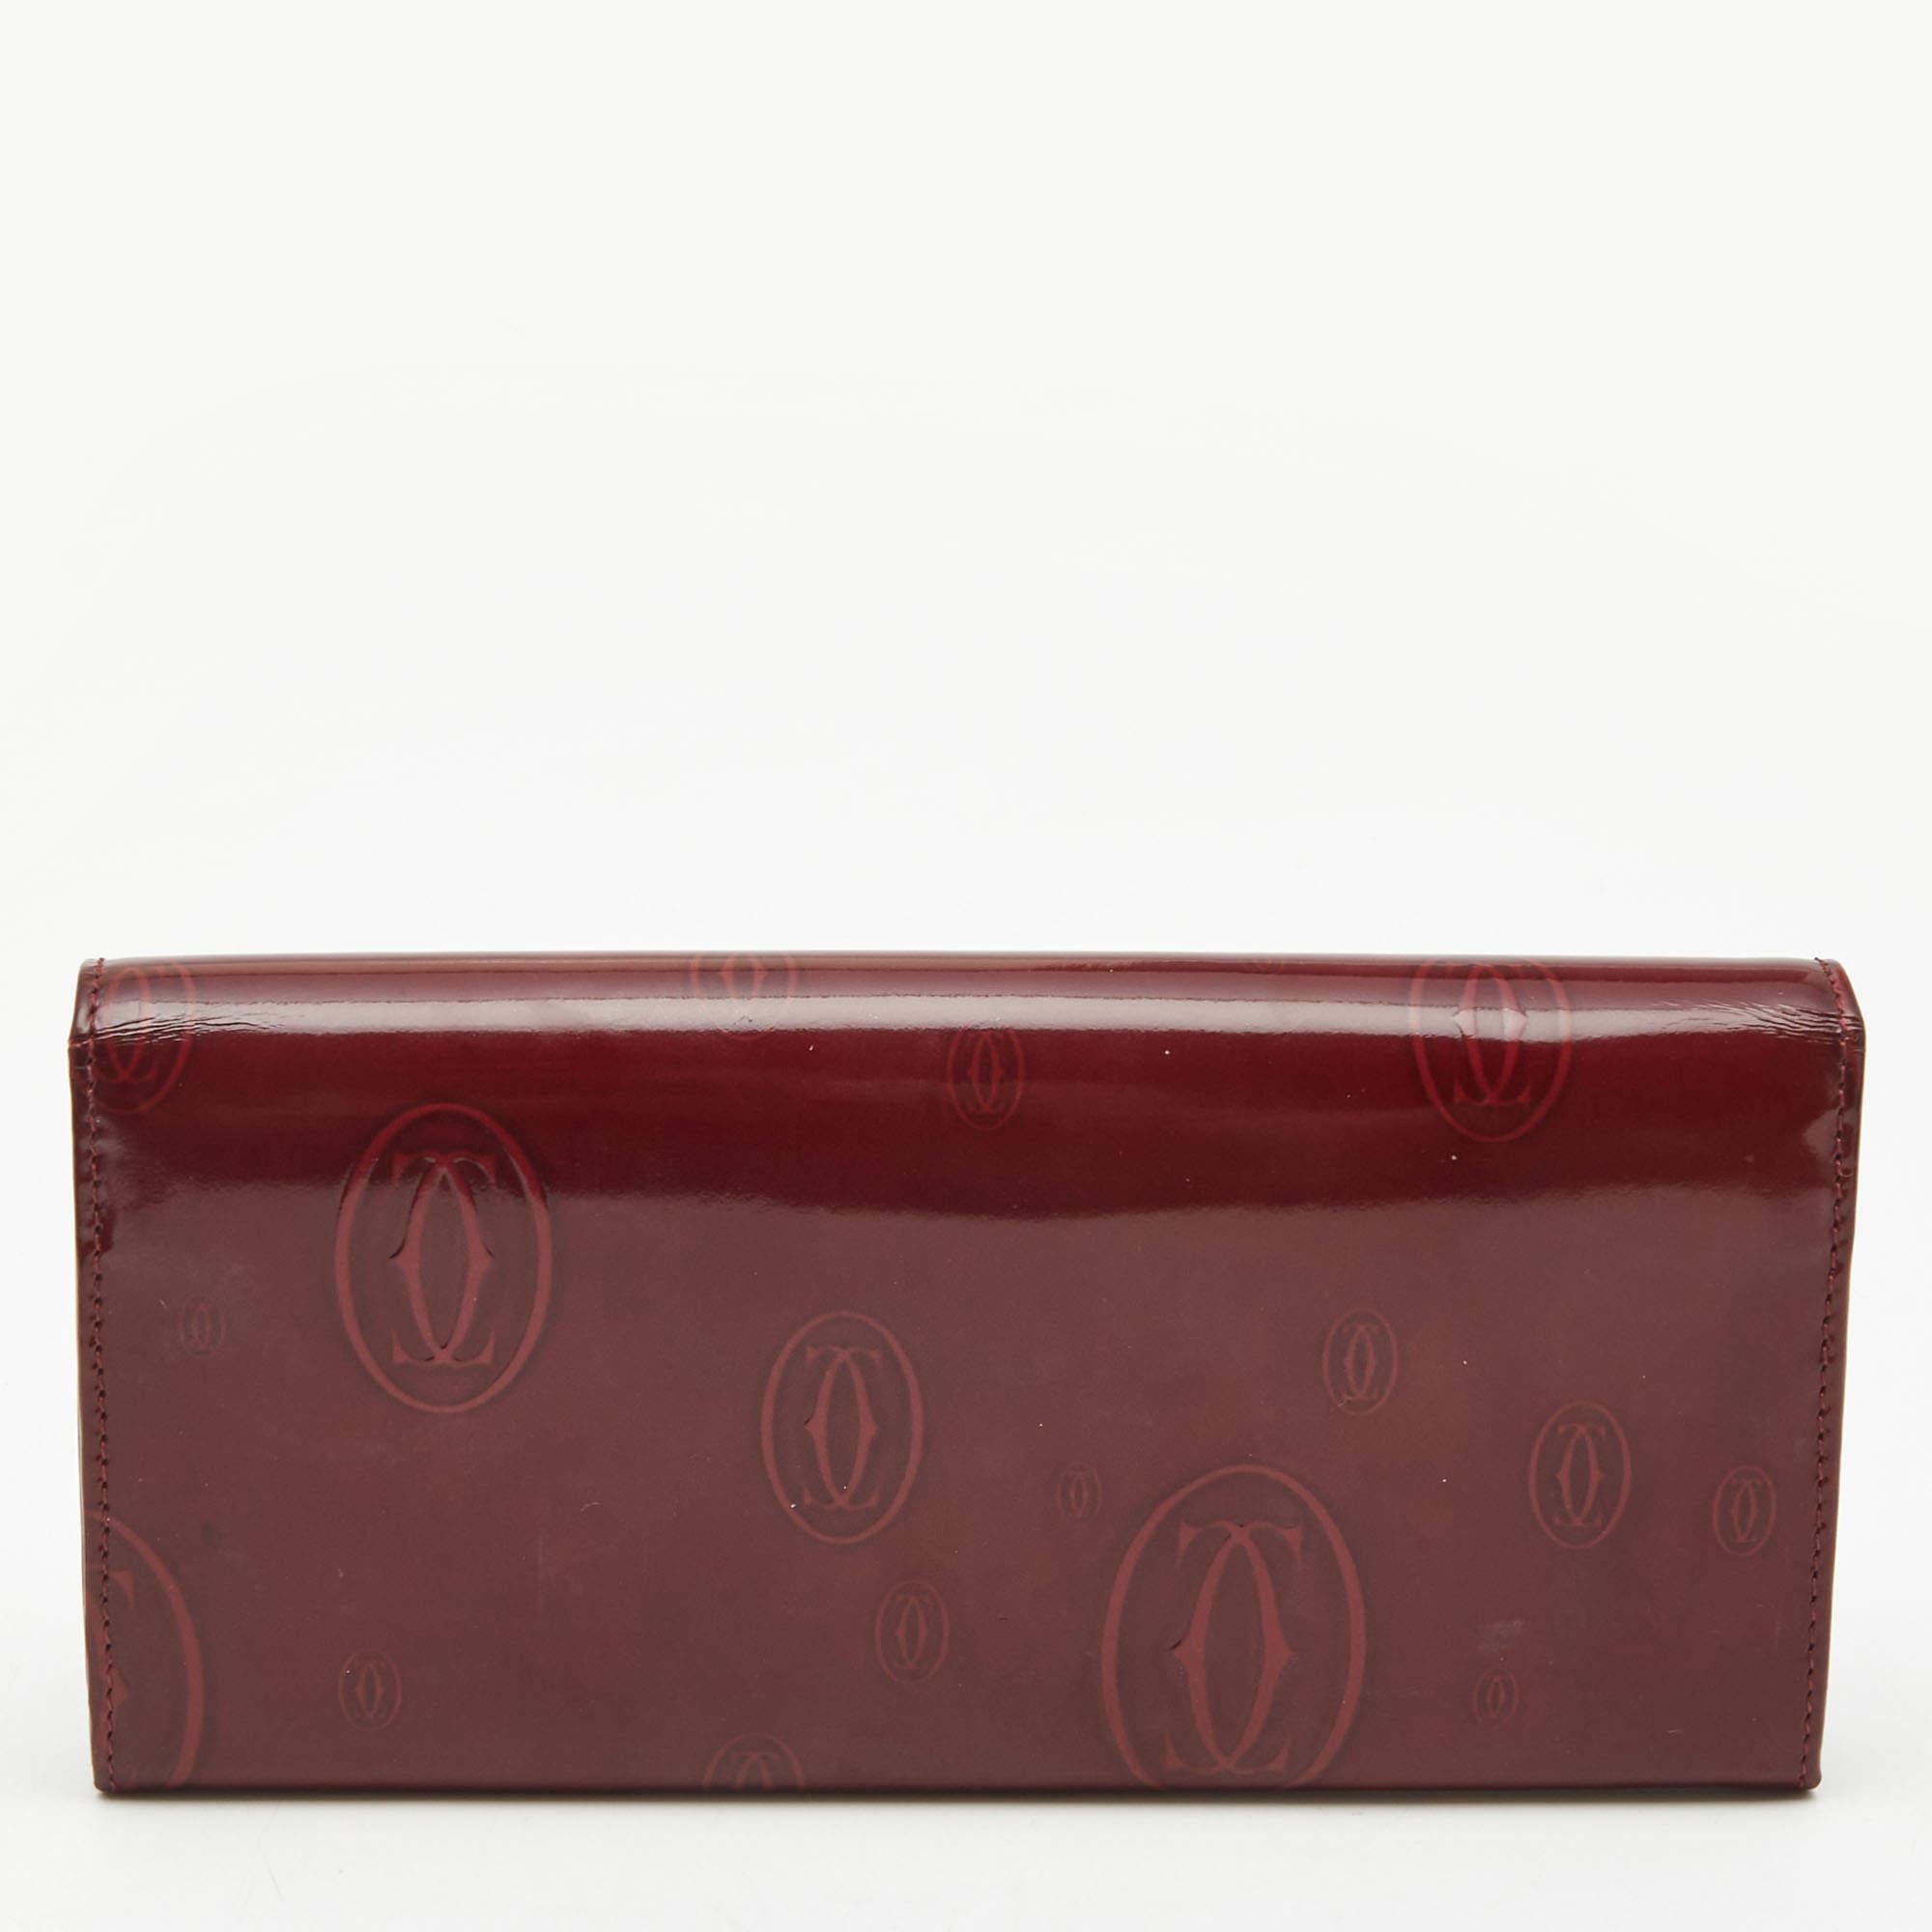 This Happy Birthday continental wallet from Cartier is designed to offer functionality and style. Crafted from patent leather, this wallet showcases brand detailing on the exterior. It is charming with silver-tone accents, and its compartmentalized